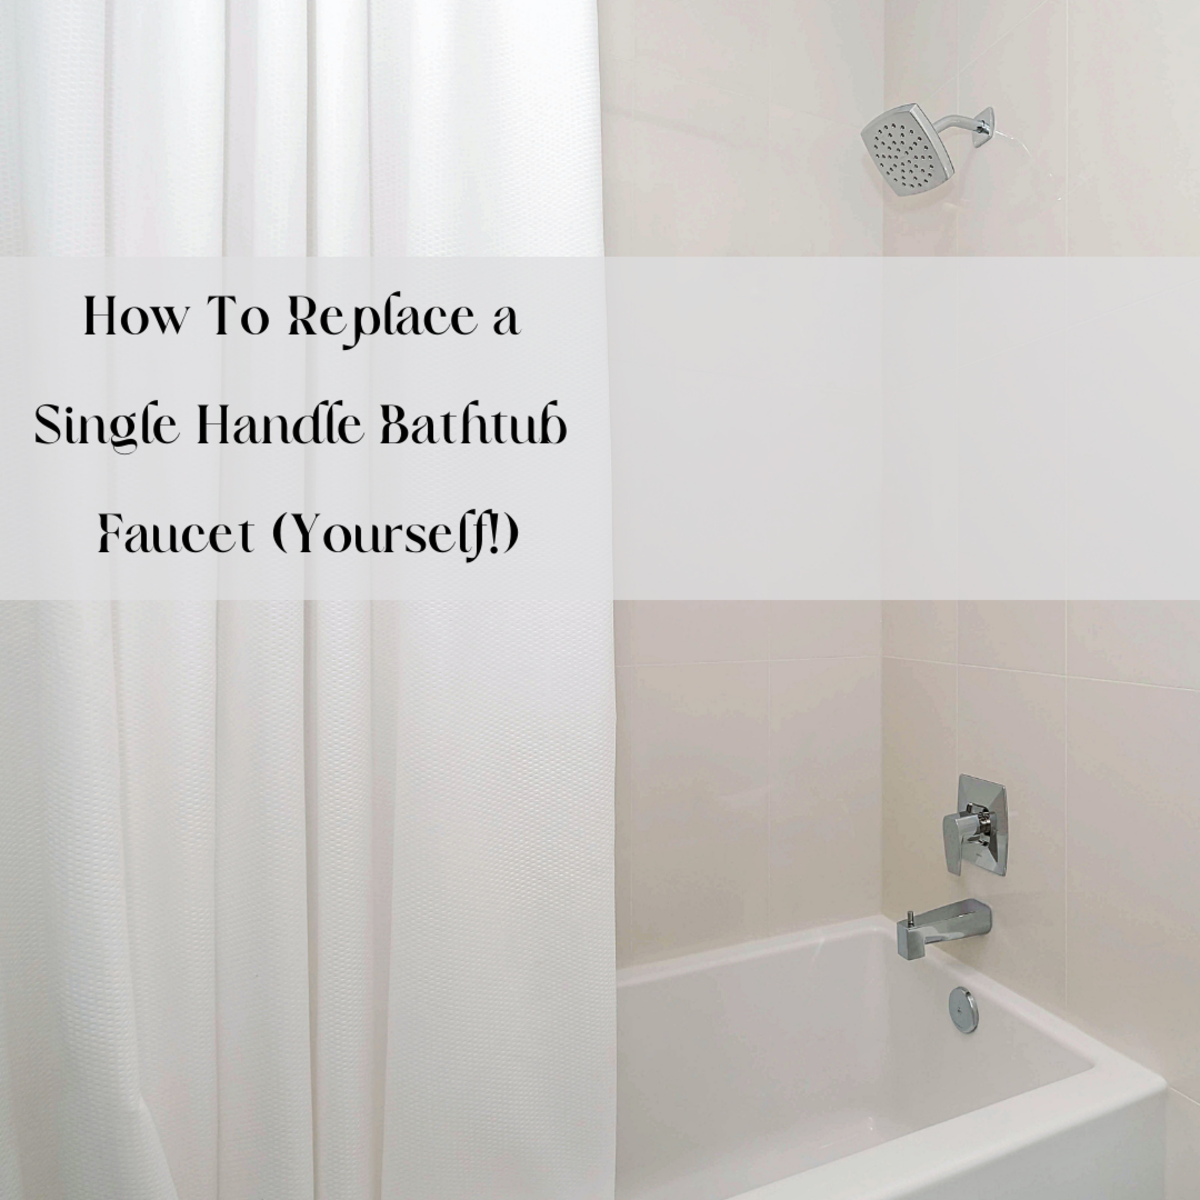 How To Replace a Single Handle Bathtub Faucet Yourself